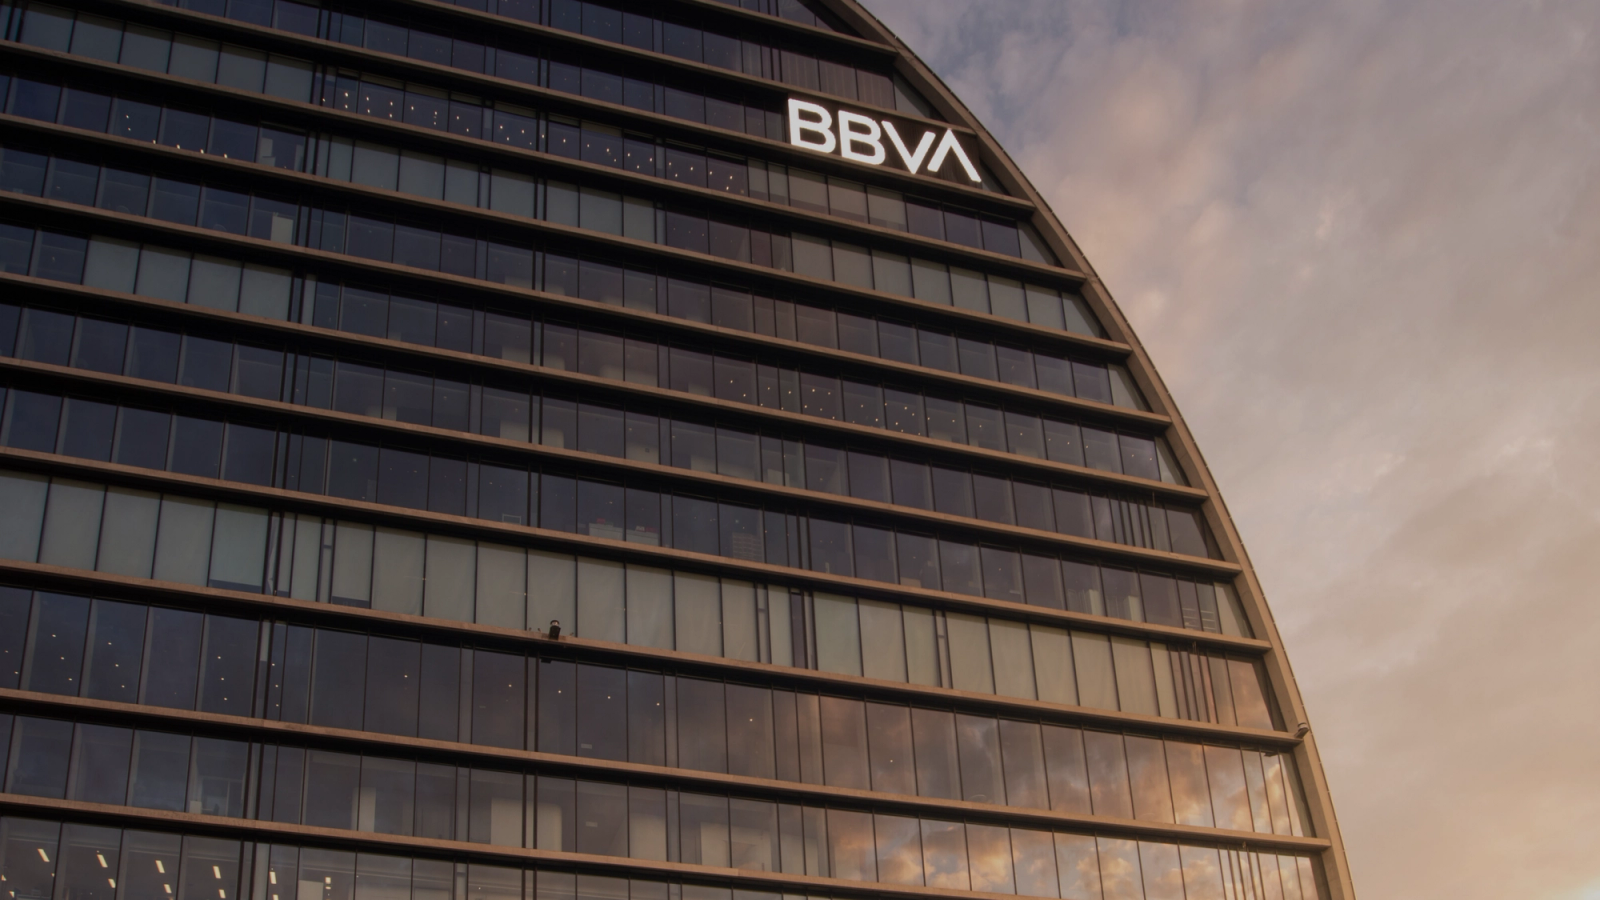 BBVA implements innovative learning strategies for employees